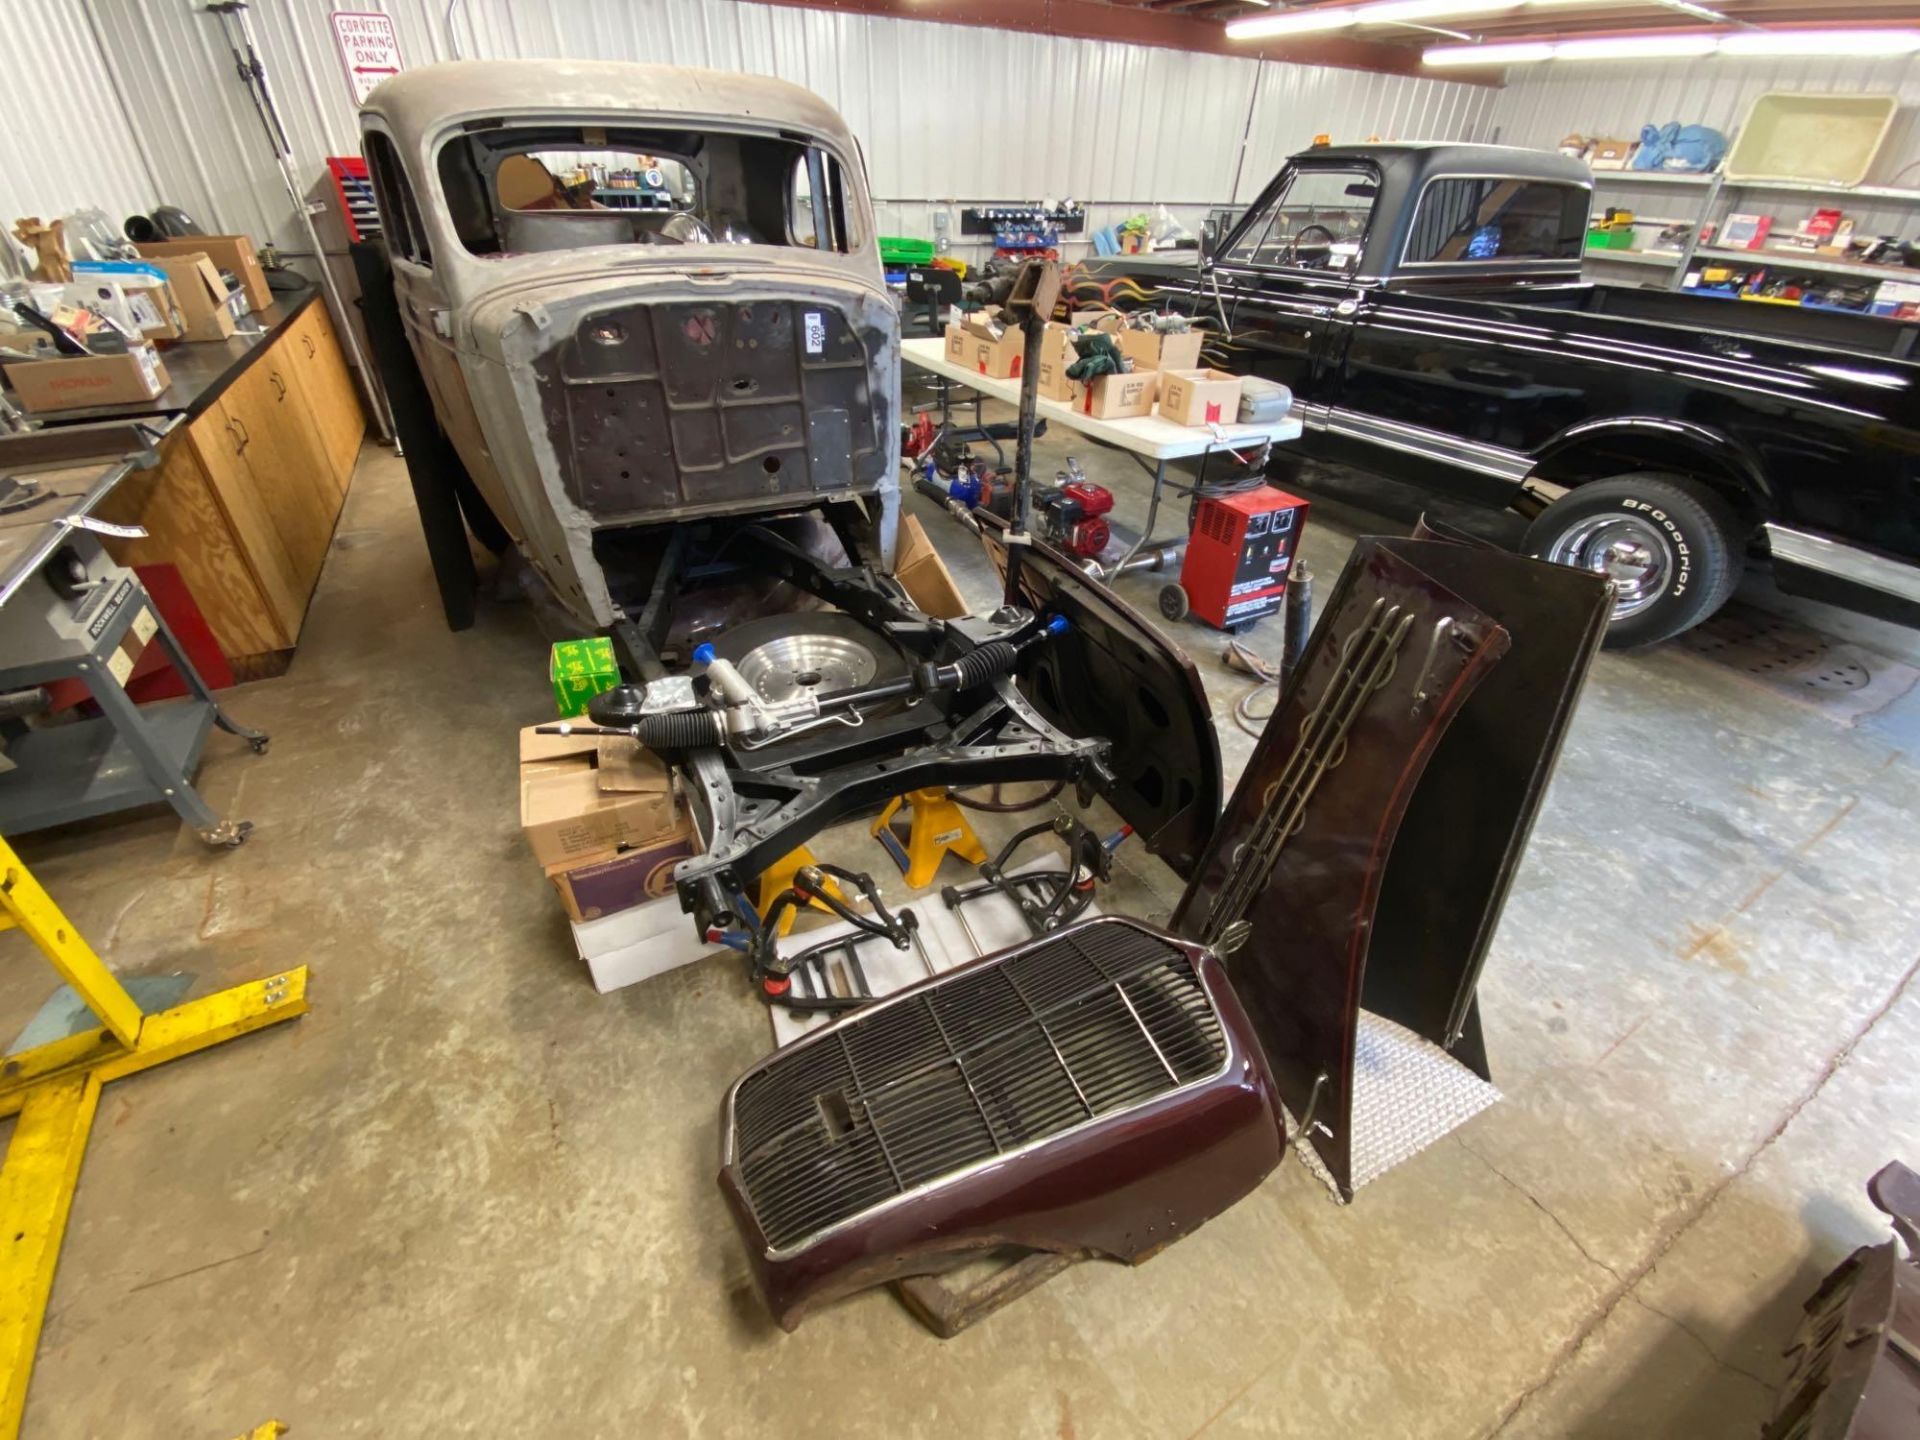 ’35 Plymouth Coupe Including Body Panels, Frame, Lights, etc. ***No Engine, Transmission, etc.*** - Image 15 of 16